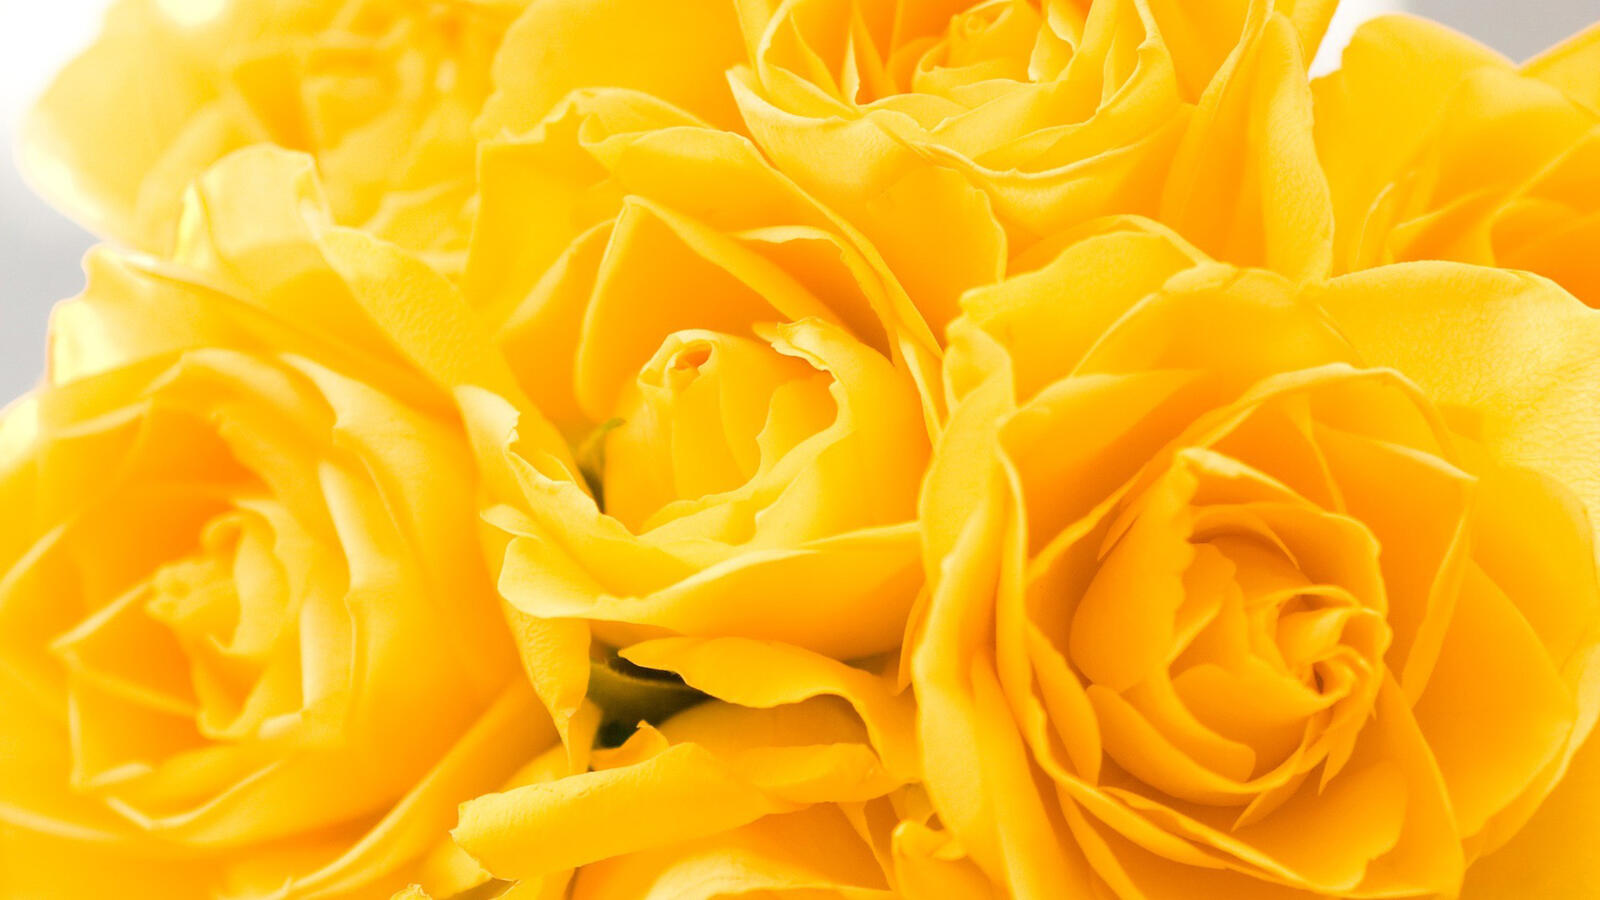 Wallpapers roses buds yellow on the desktop